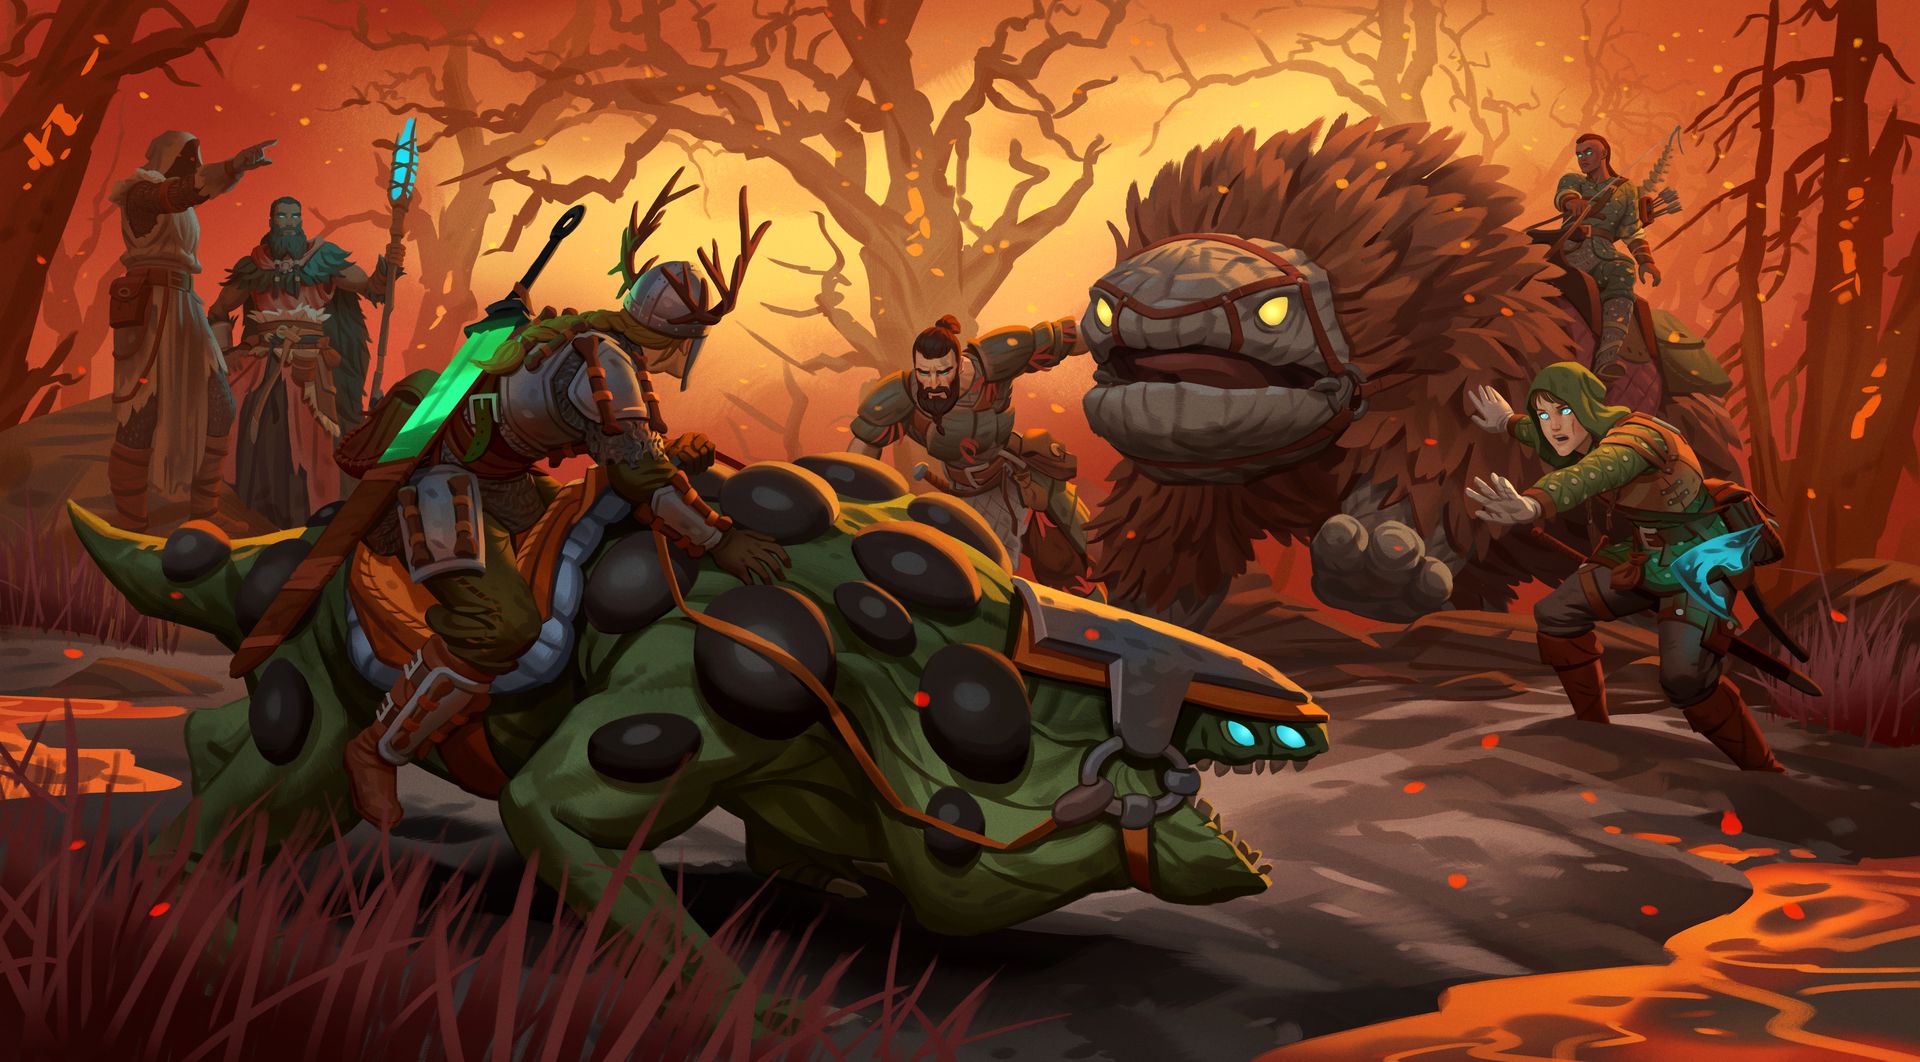 A piece of art depicting the dangers of the Ashlands, a new fiery and dangerous biome added to Viking survival game Valheim. A cragged rock beast with bright yellow eyes is charging forward towards a Viking on a lizard mount. Other Vikings surround the scene, trying to stop the beast.